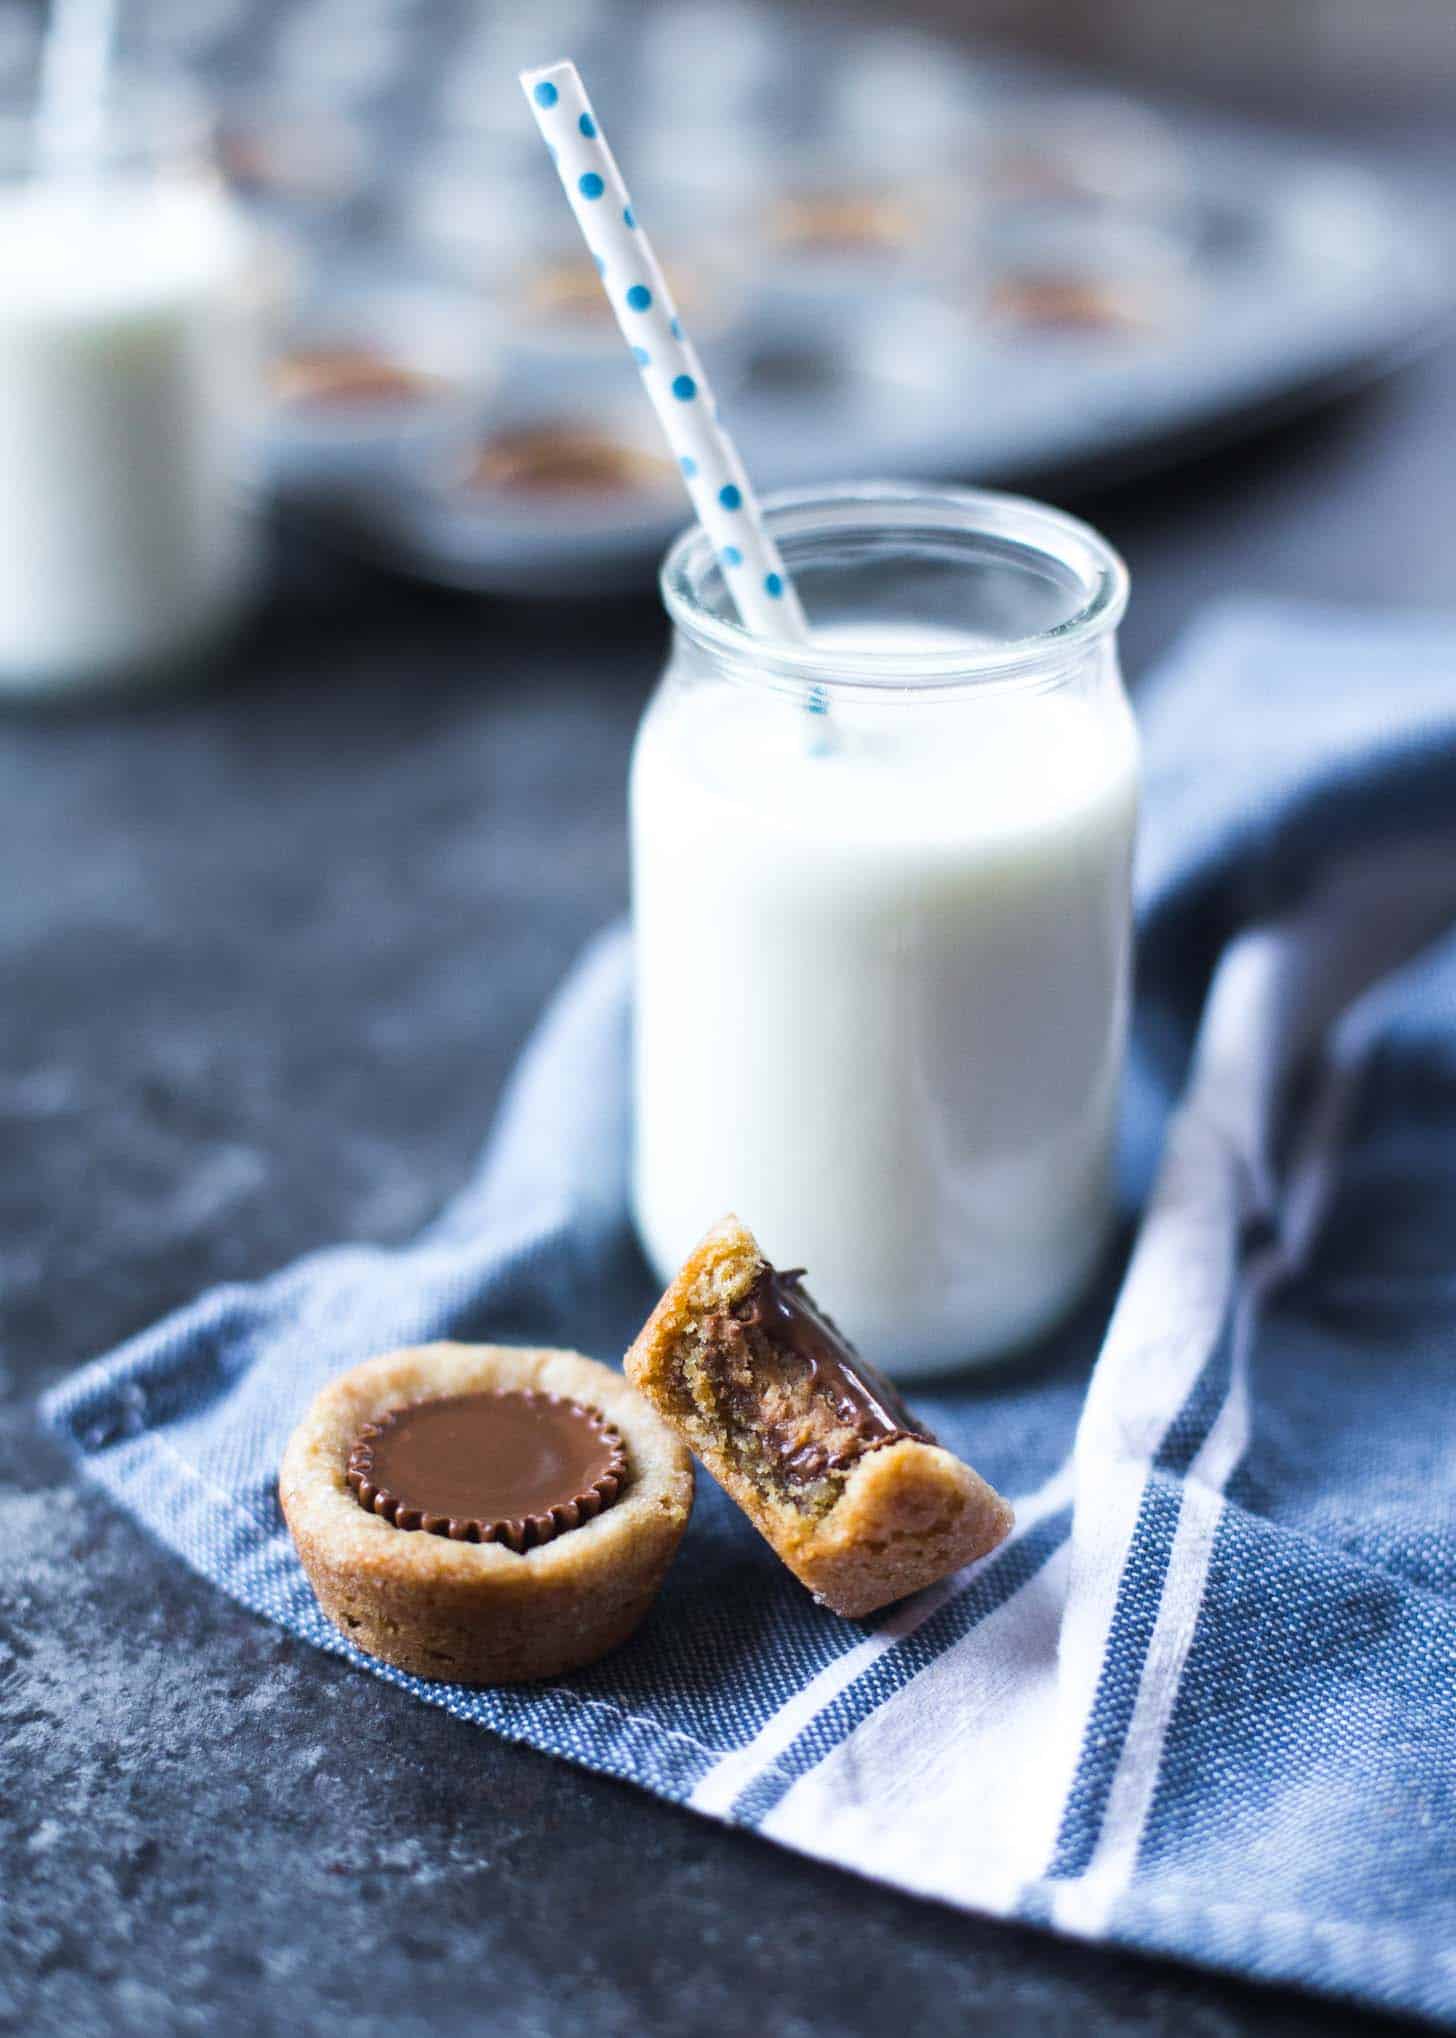 Peanut Butter Cookie Cups next to a small glass of milk